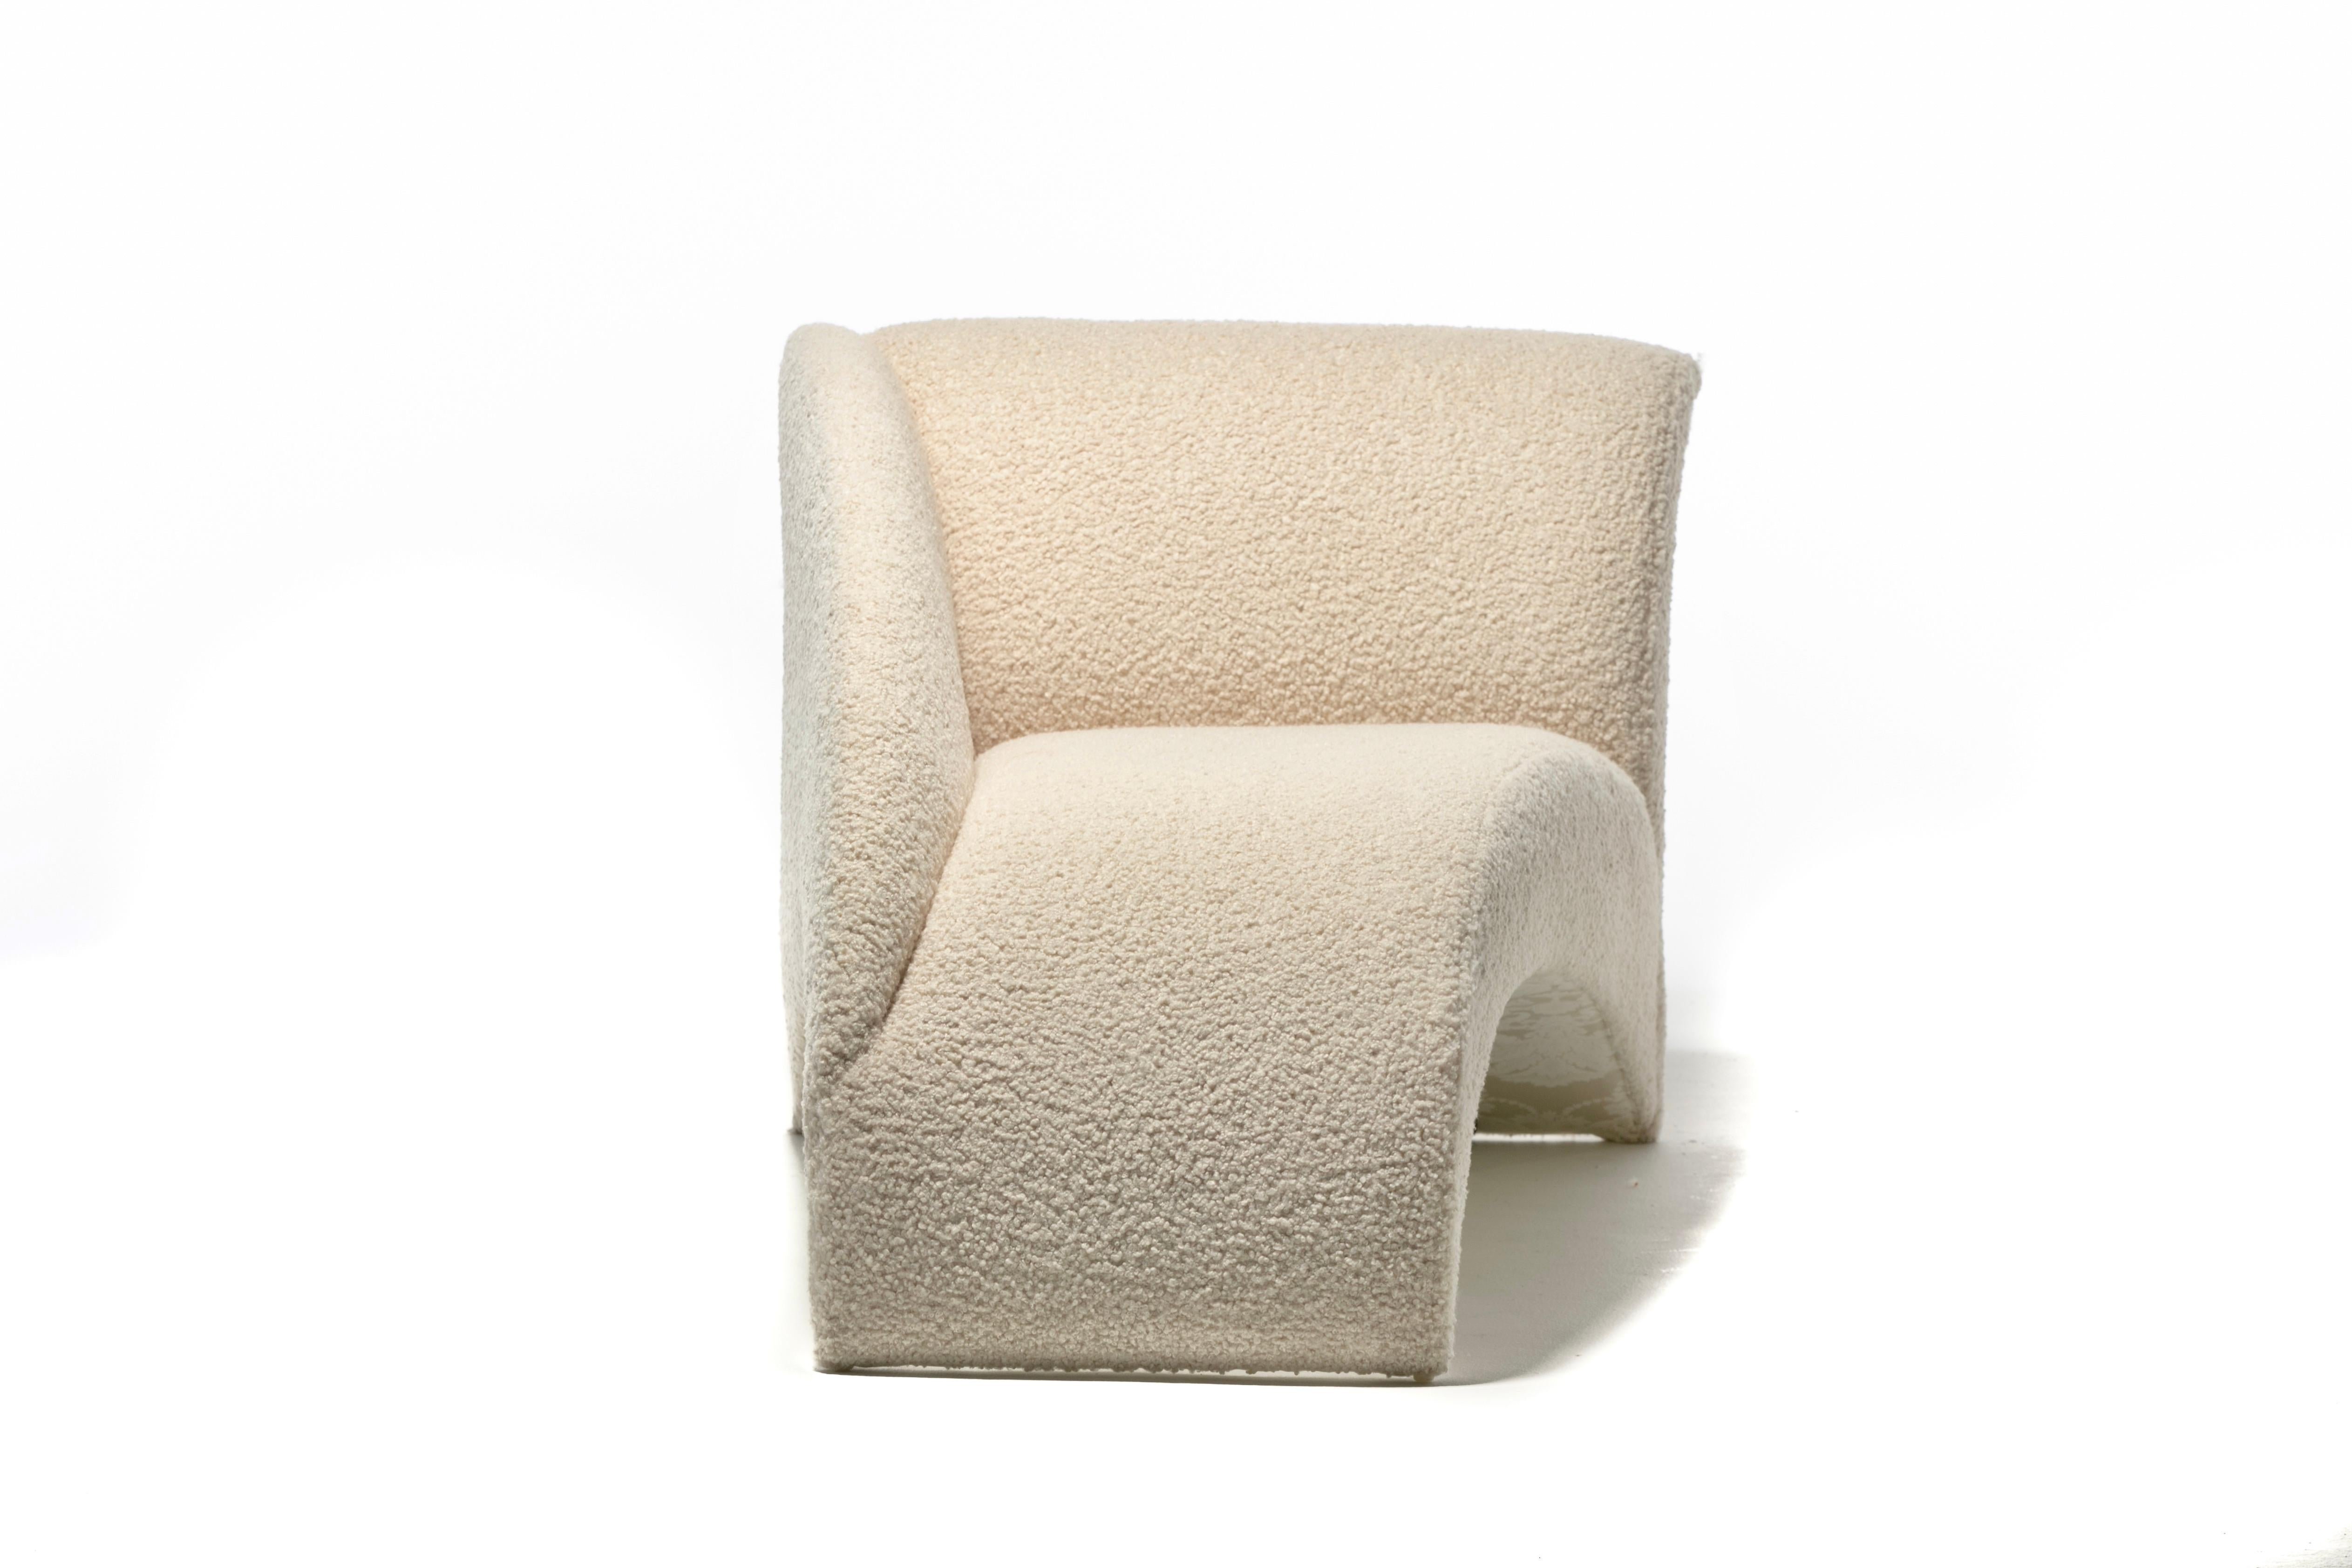 Vladimir Kagan Post Modern Marilyn Chaise Lounge in Ivory White Bouclé c. 1986 For Sale 3